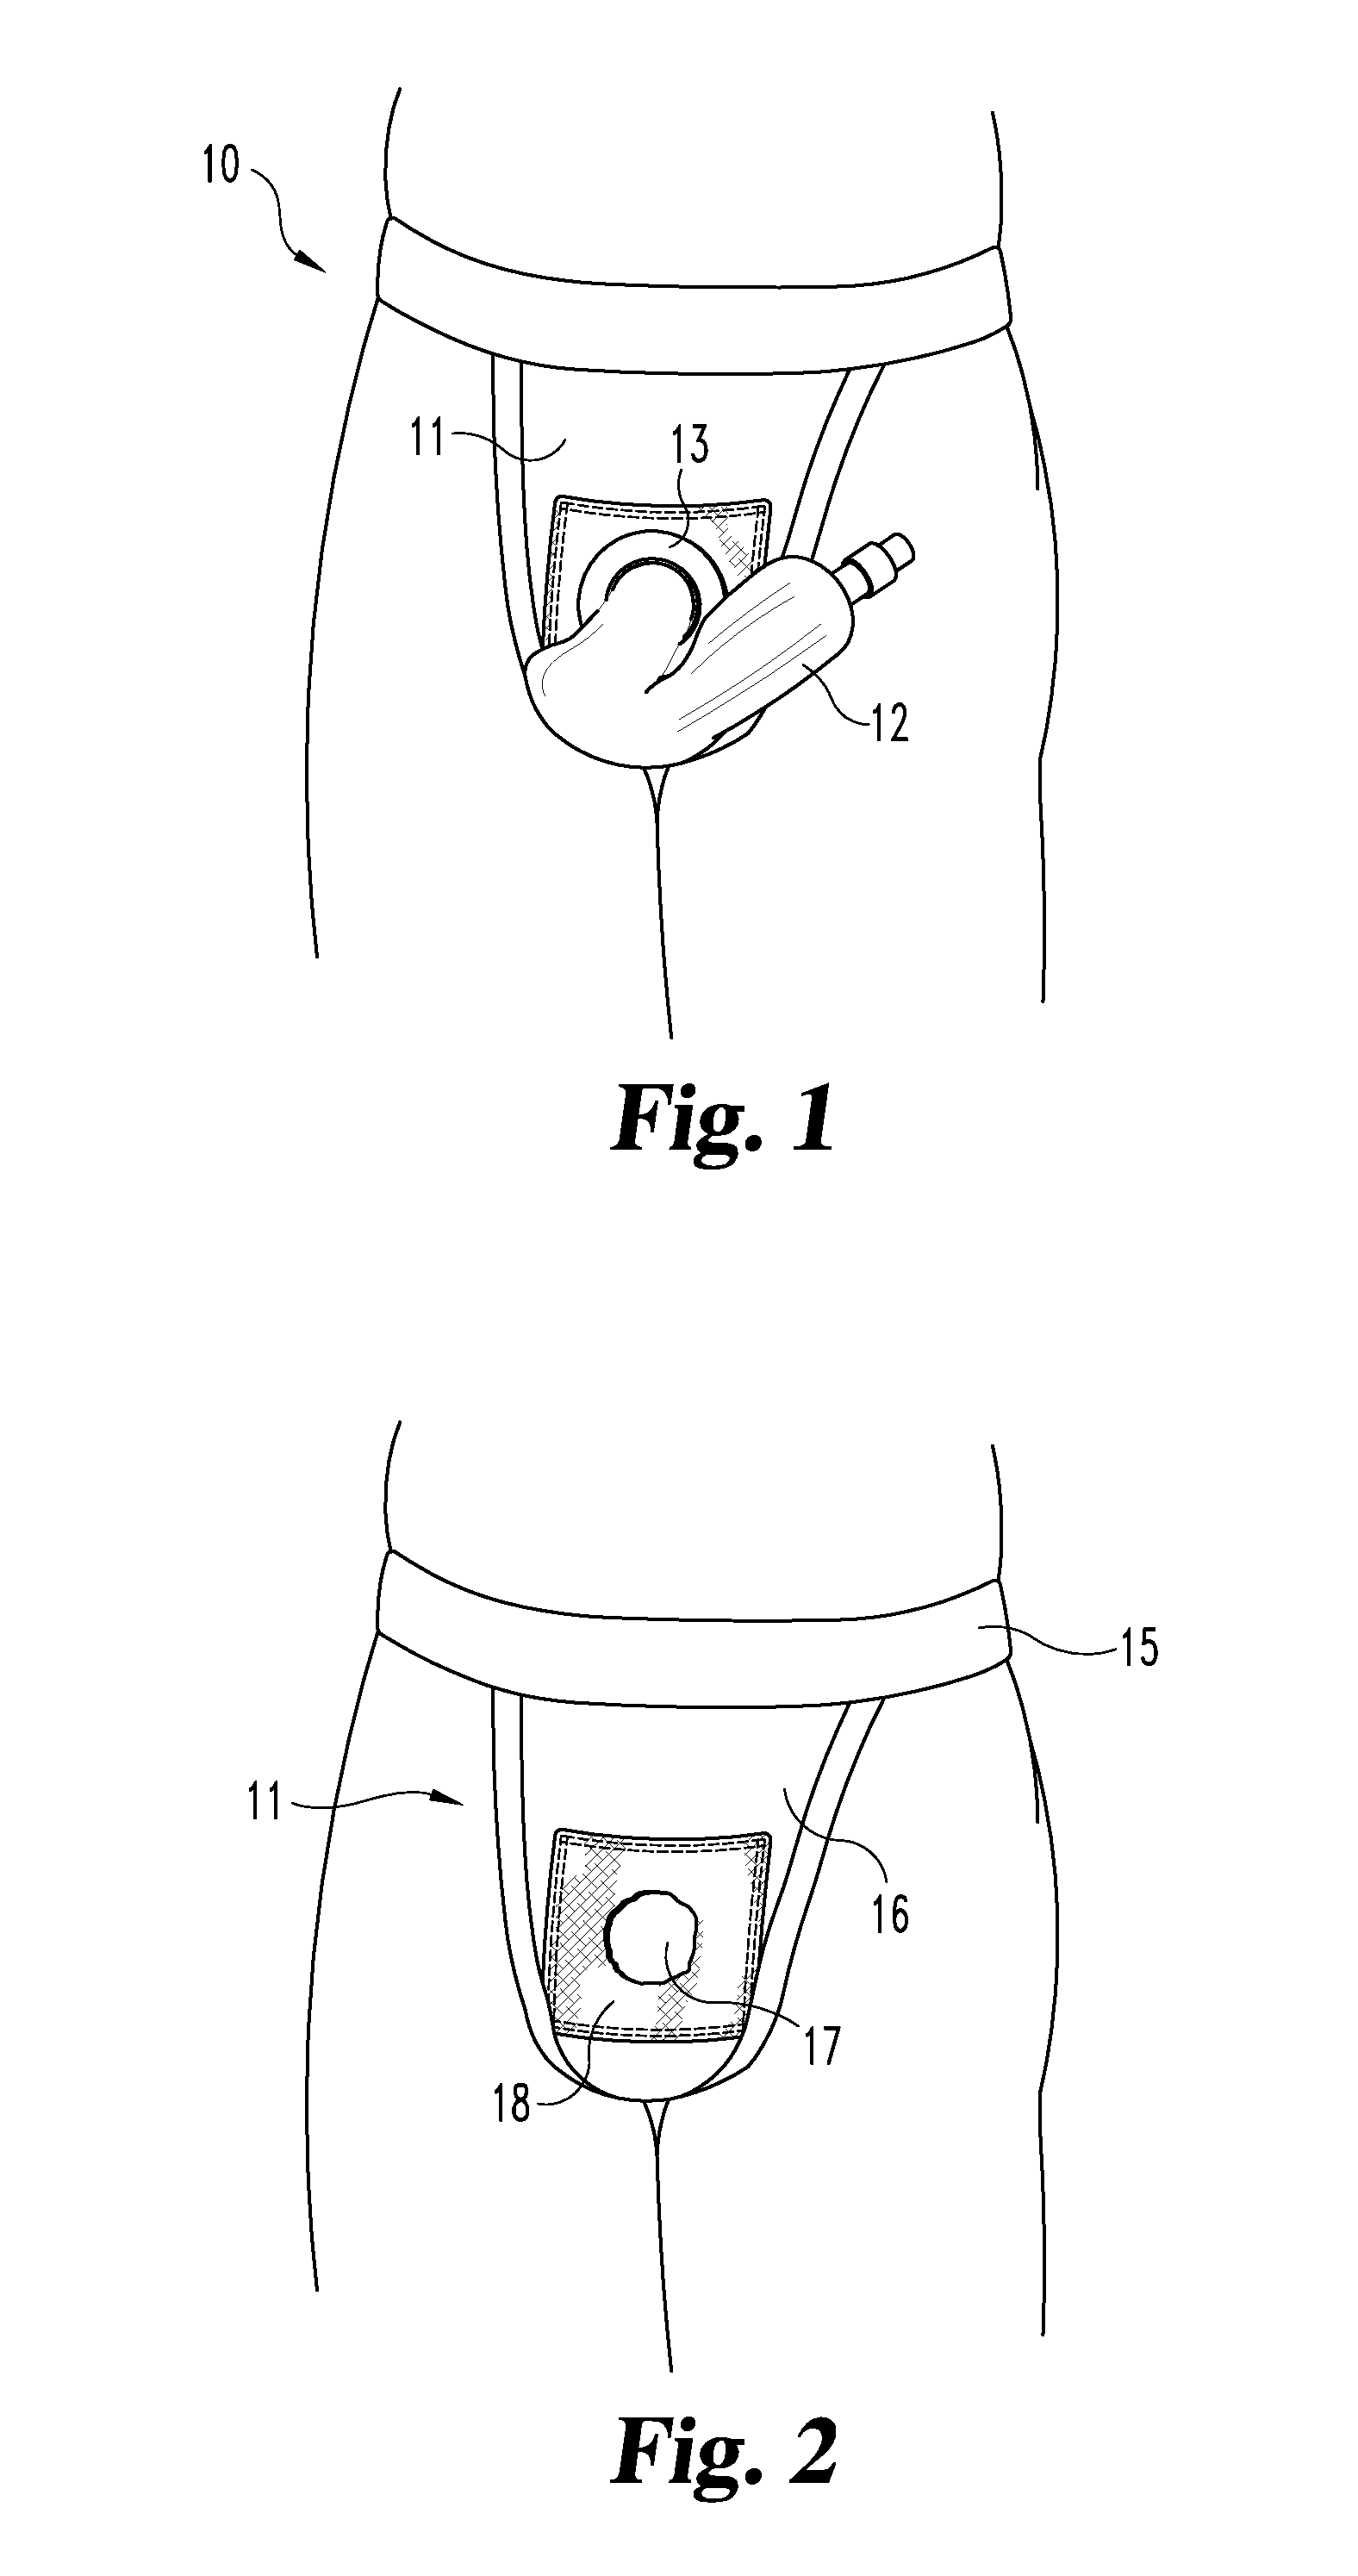 Device for supporting an ex-dwelling catheter